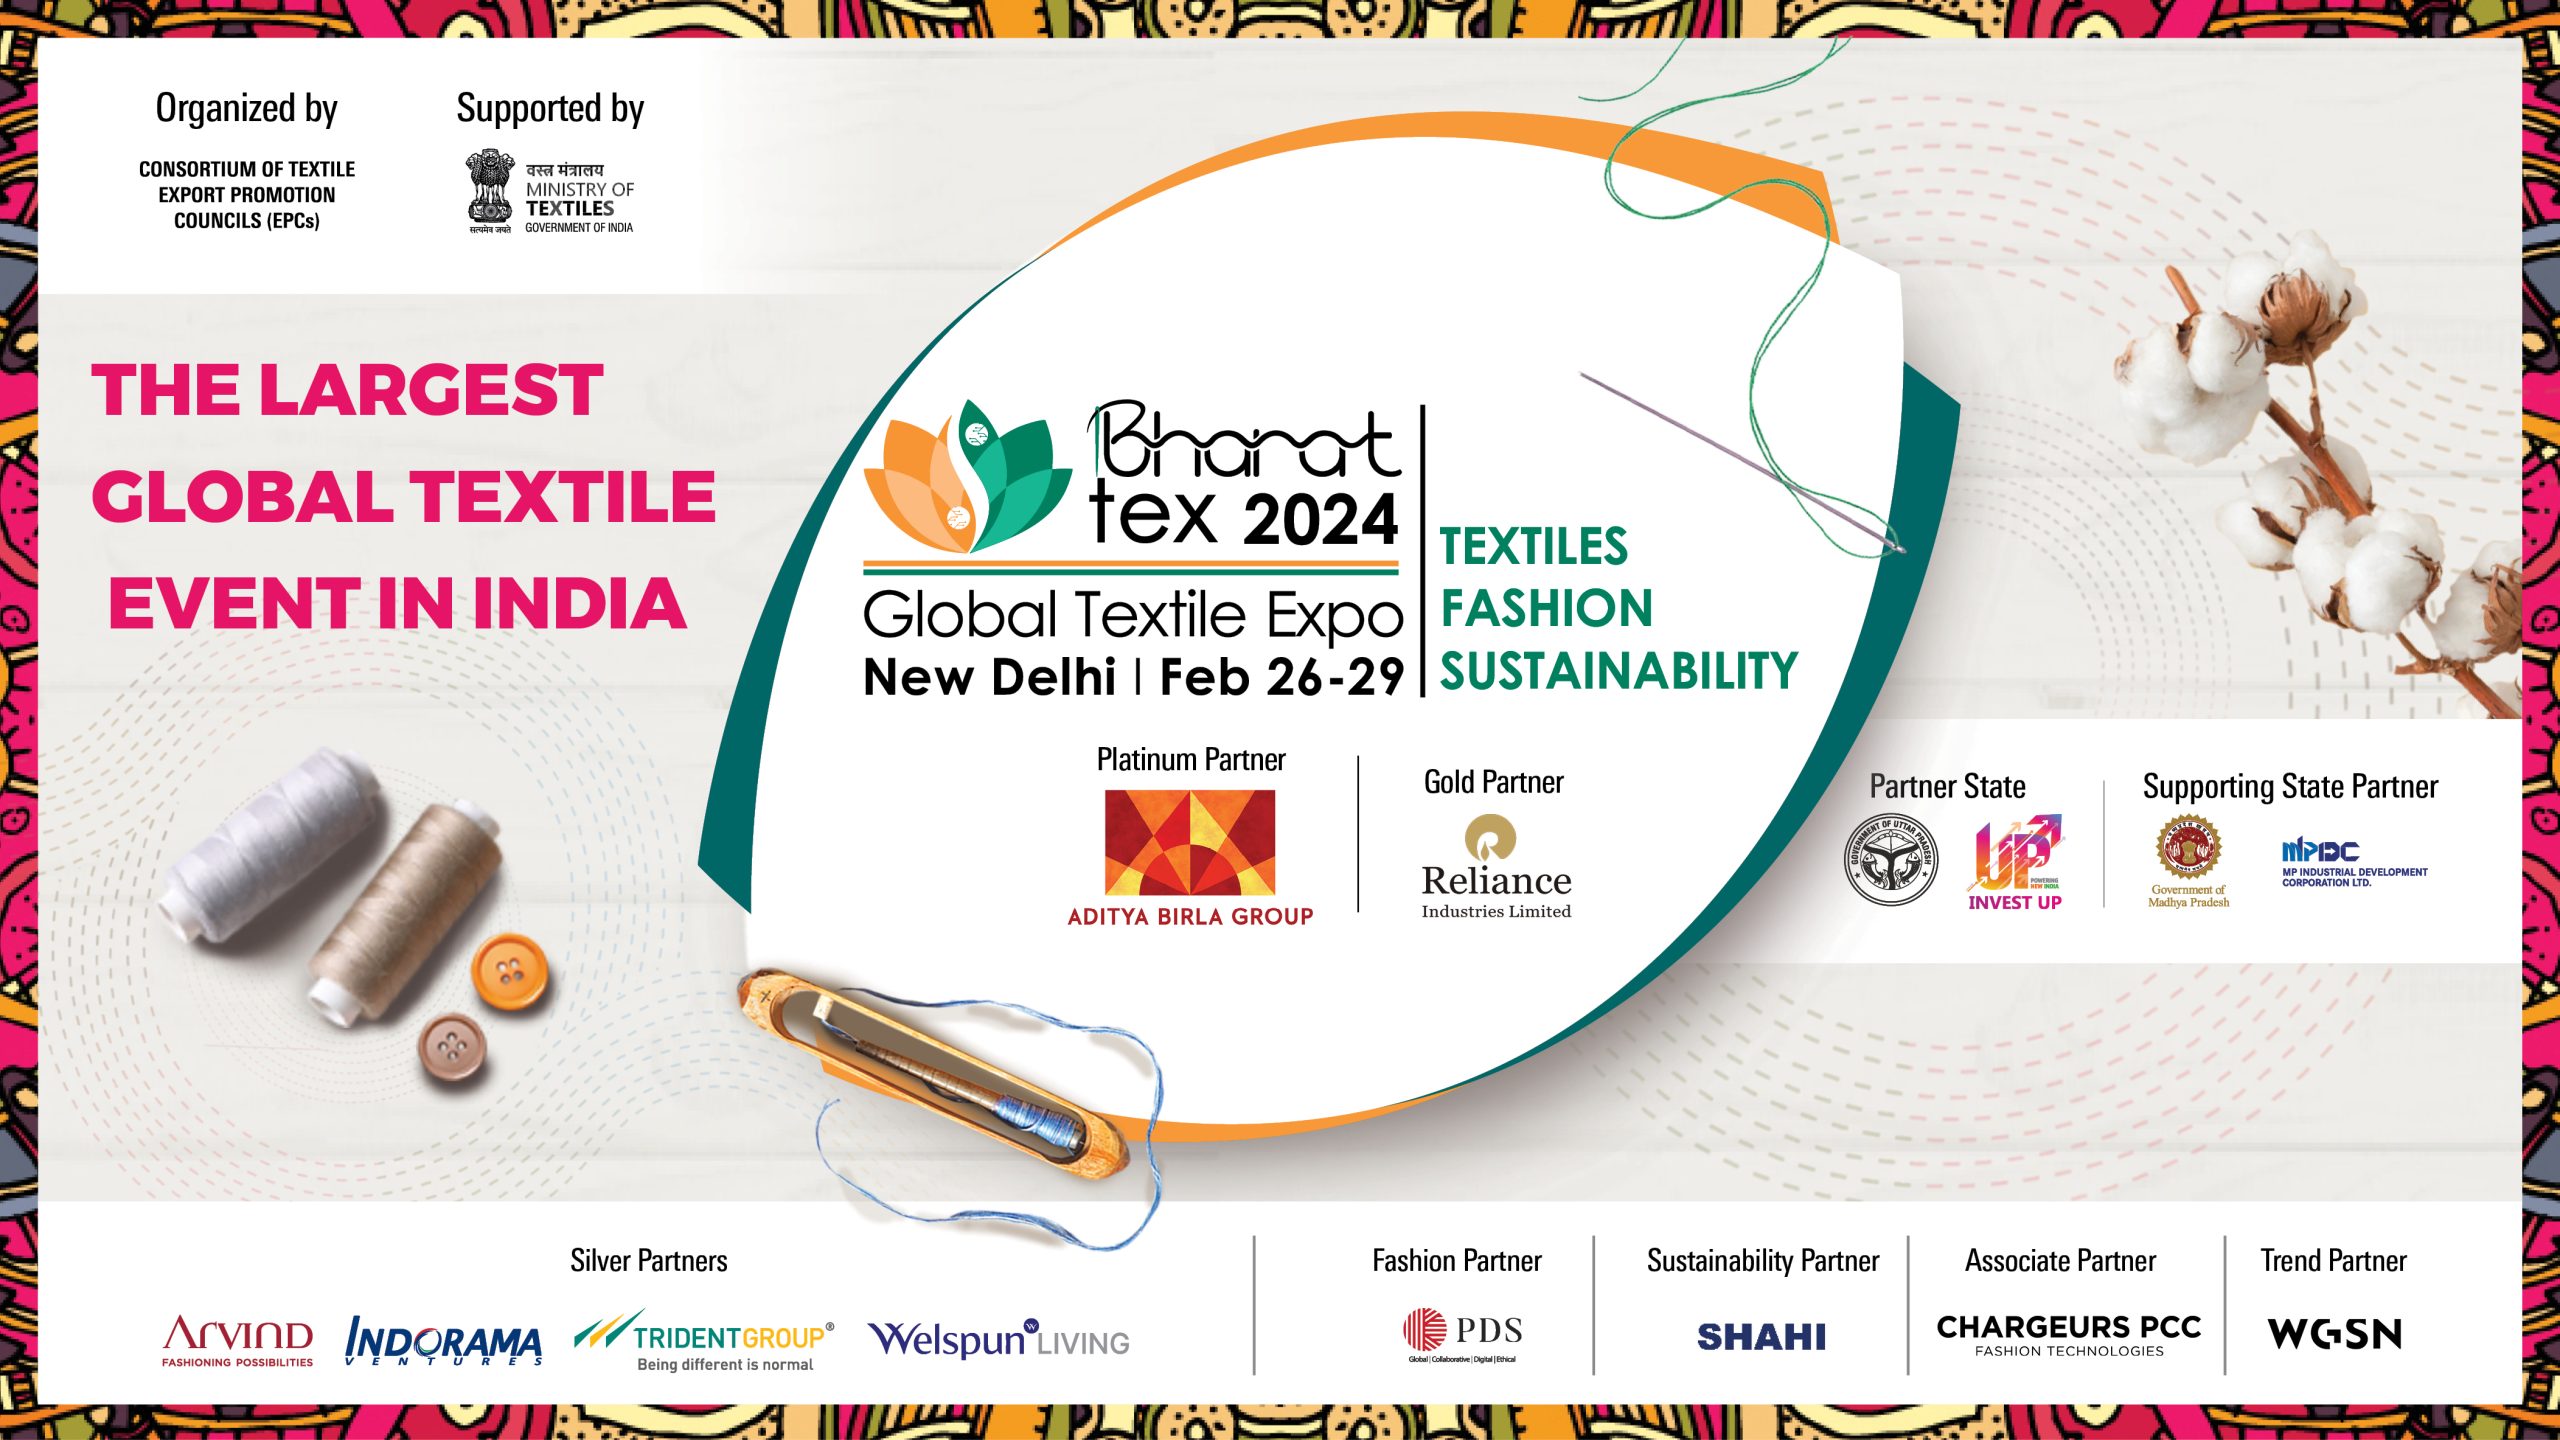 Bharat Tex 2024 reveals key partnerships with industry leaders and associations scaled